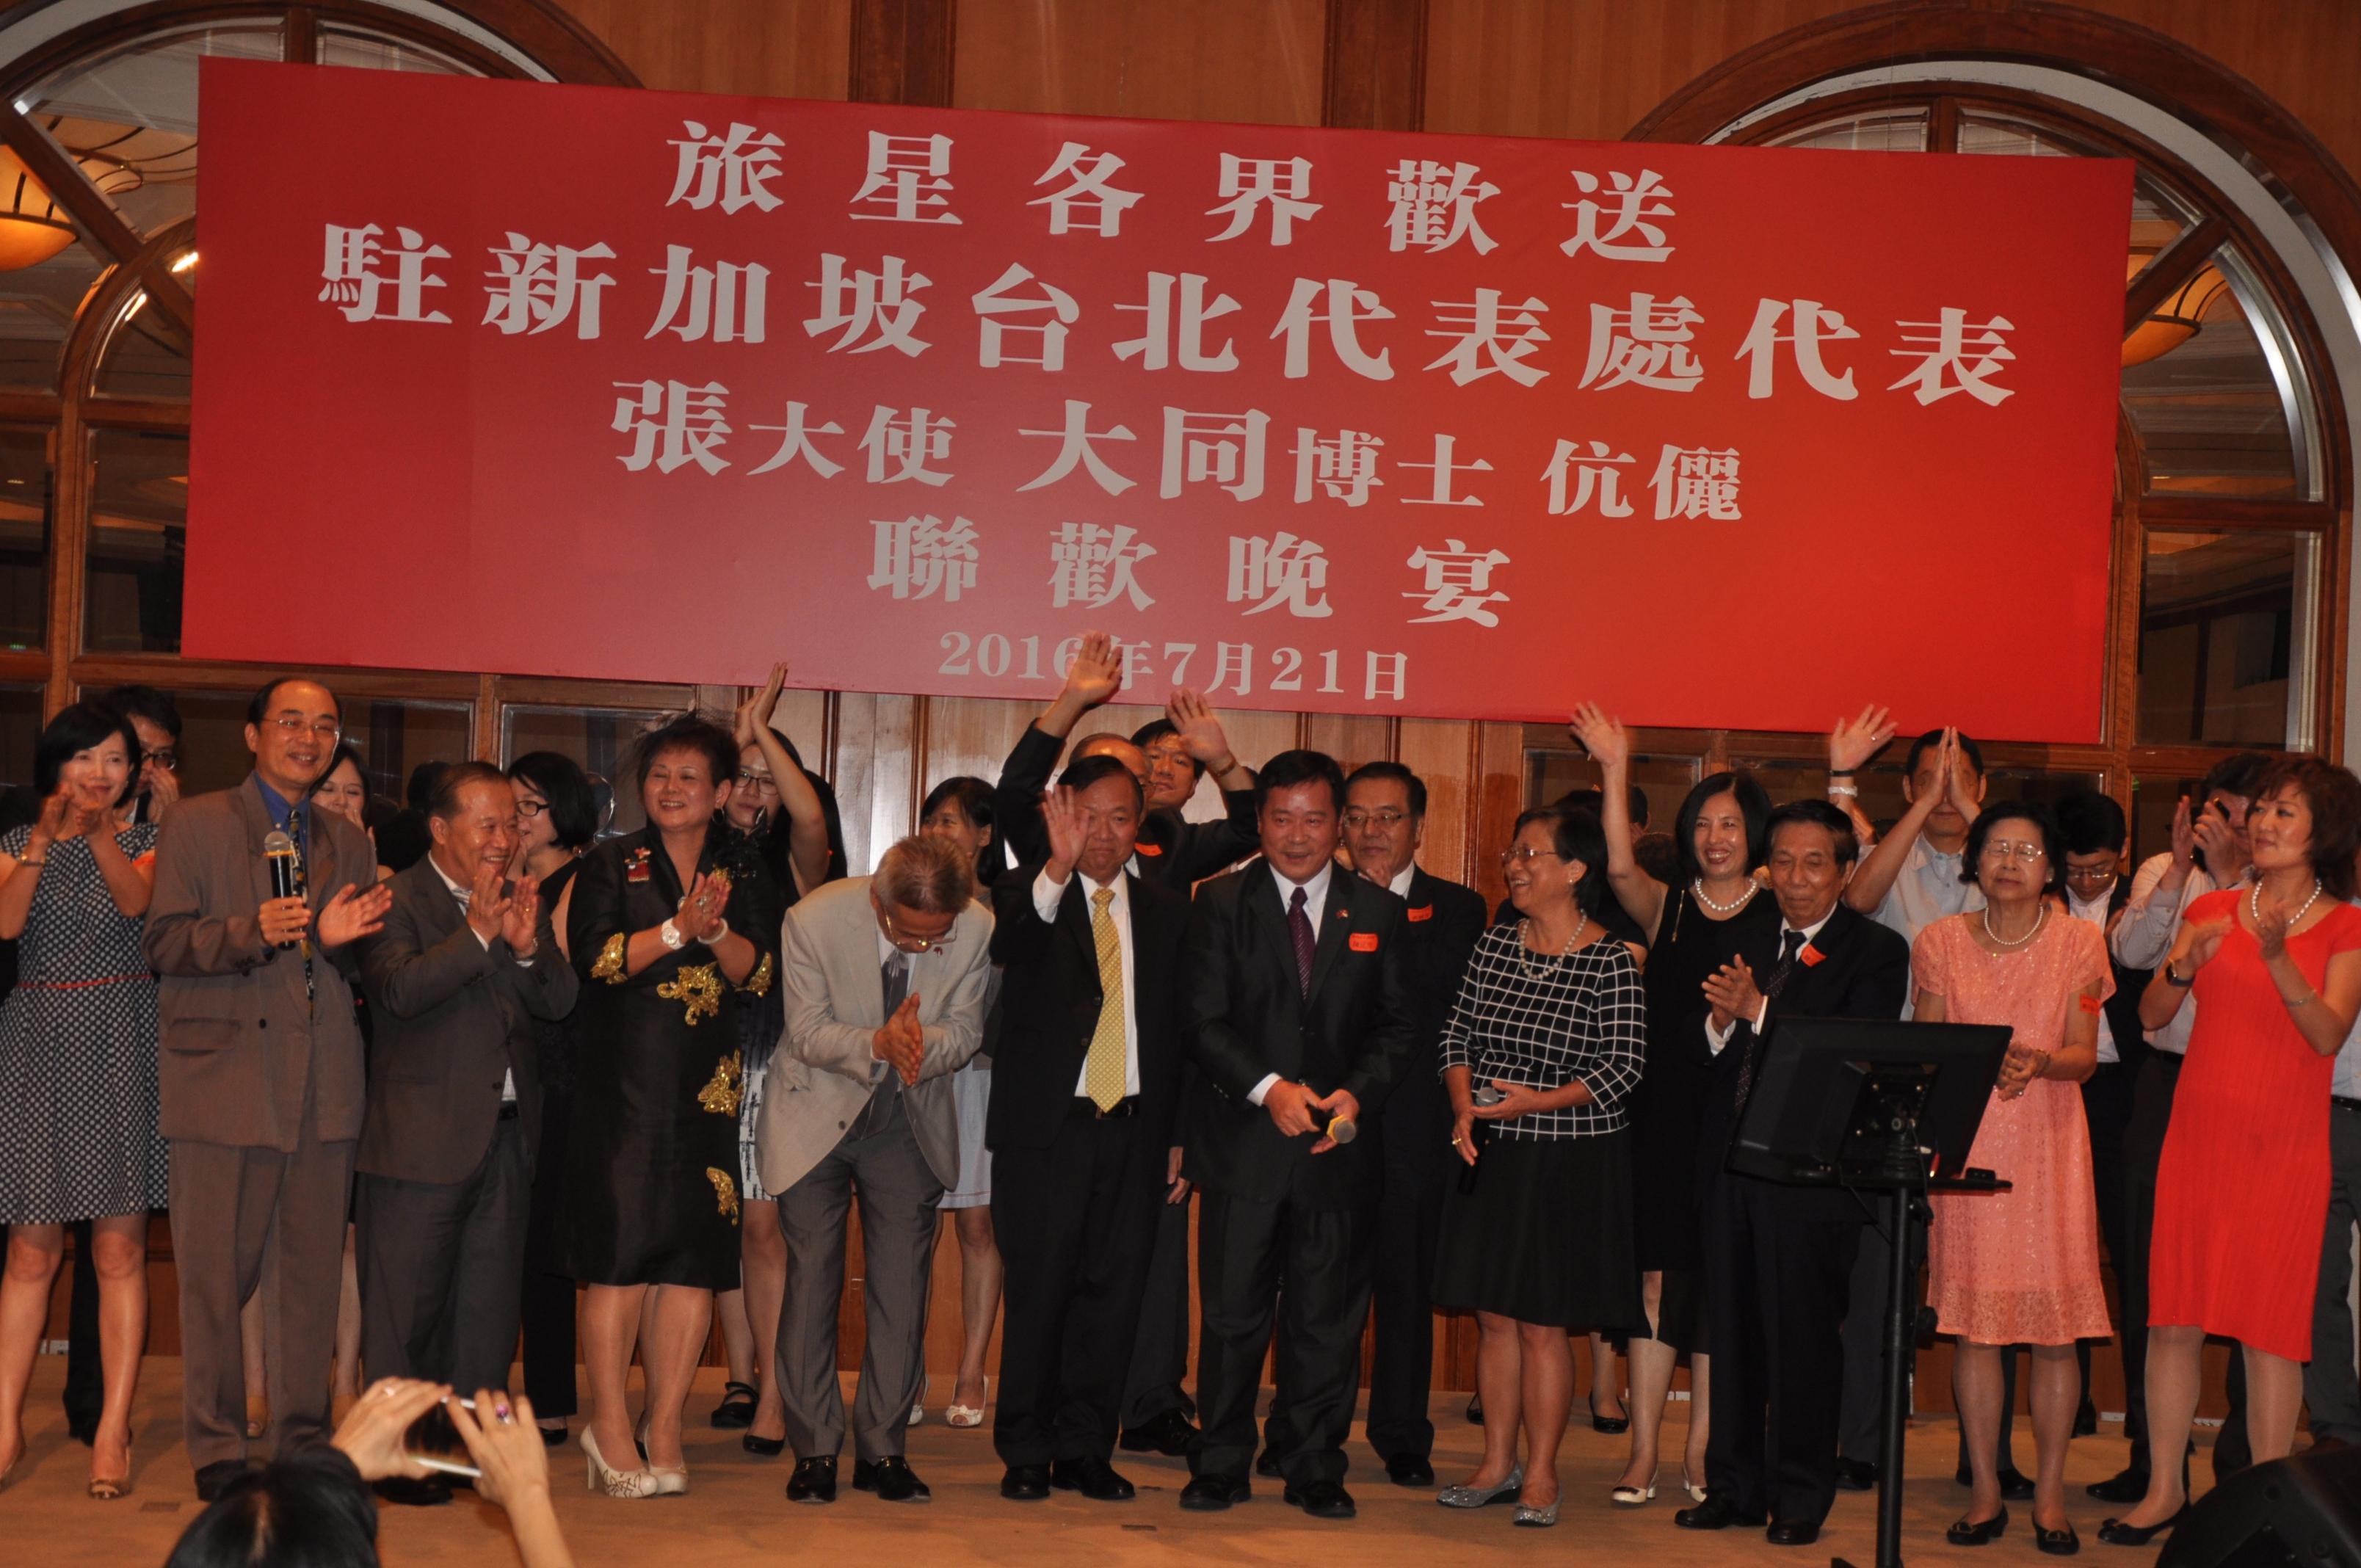 2.	Representative and Mrs. Ta-Tung Jacob Chang (sixth from left and fourth from right) singing along with guests at the farewell dinner.